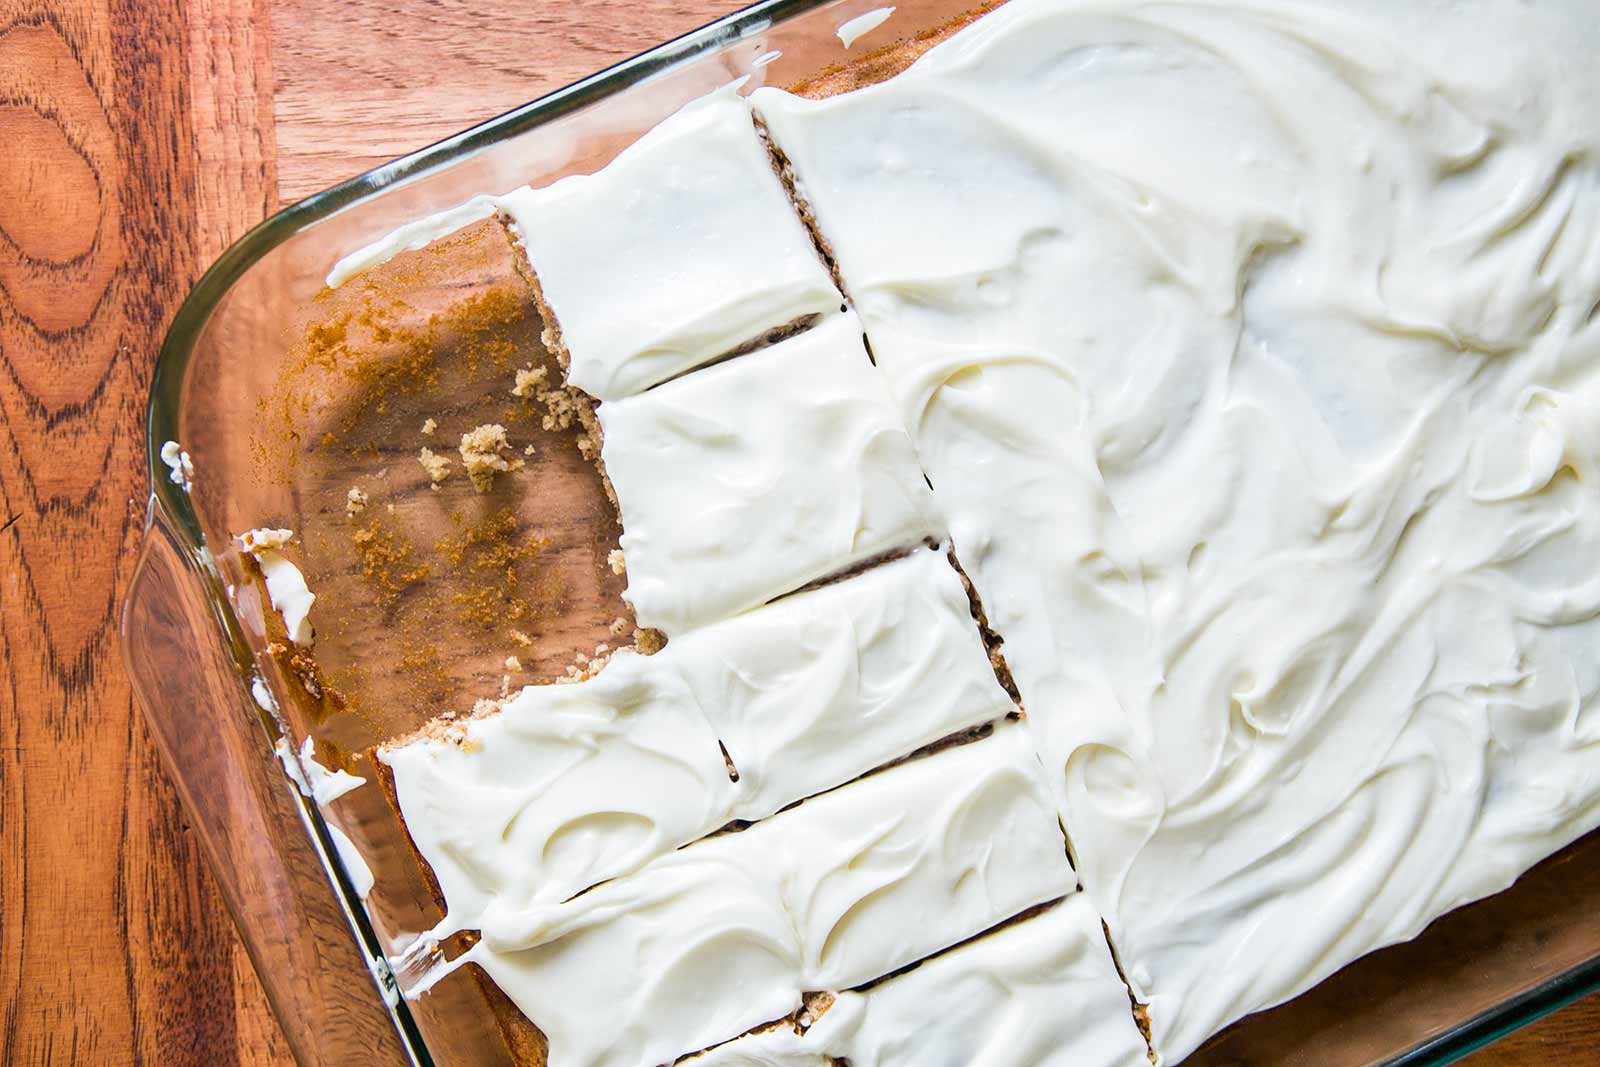 Banana Sheet Cake with Cream Cheese Frosting